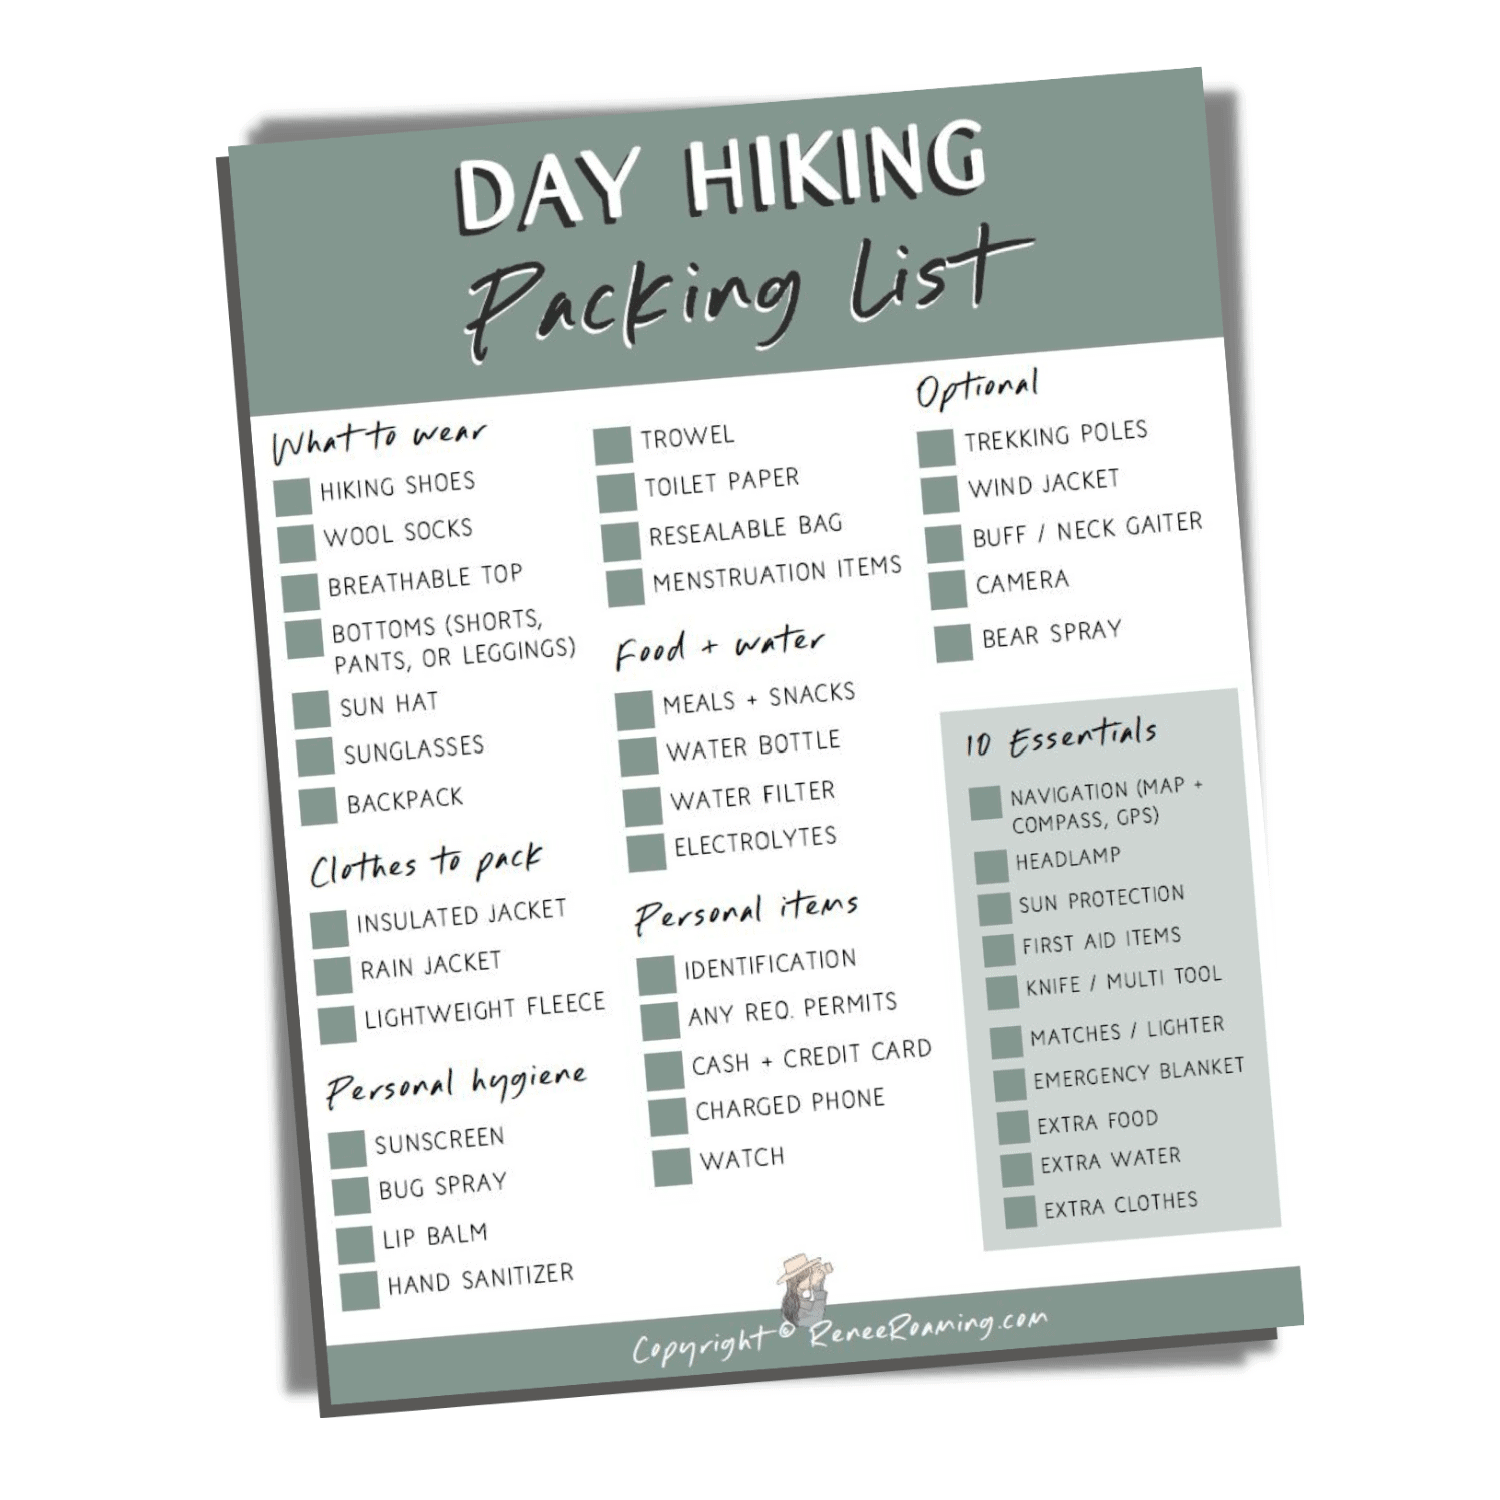 Day Hiking Packing List